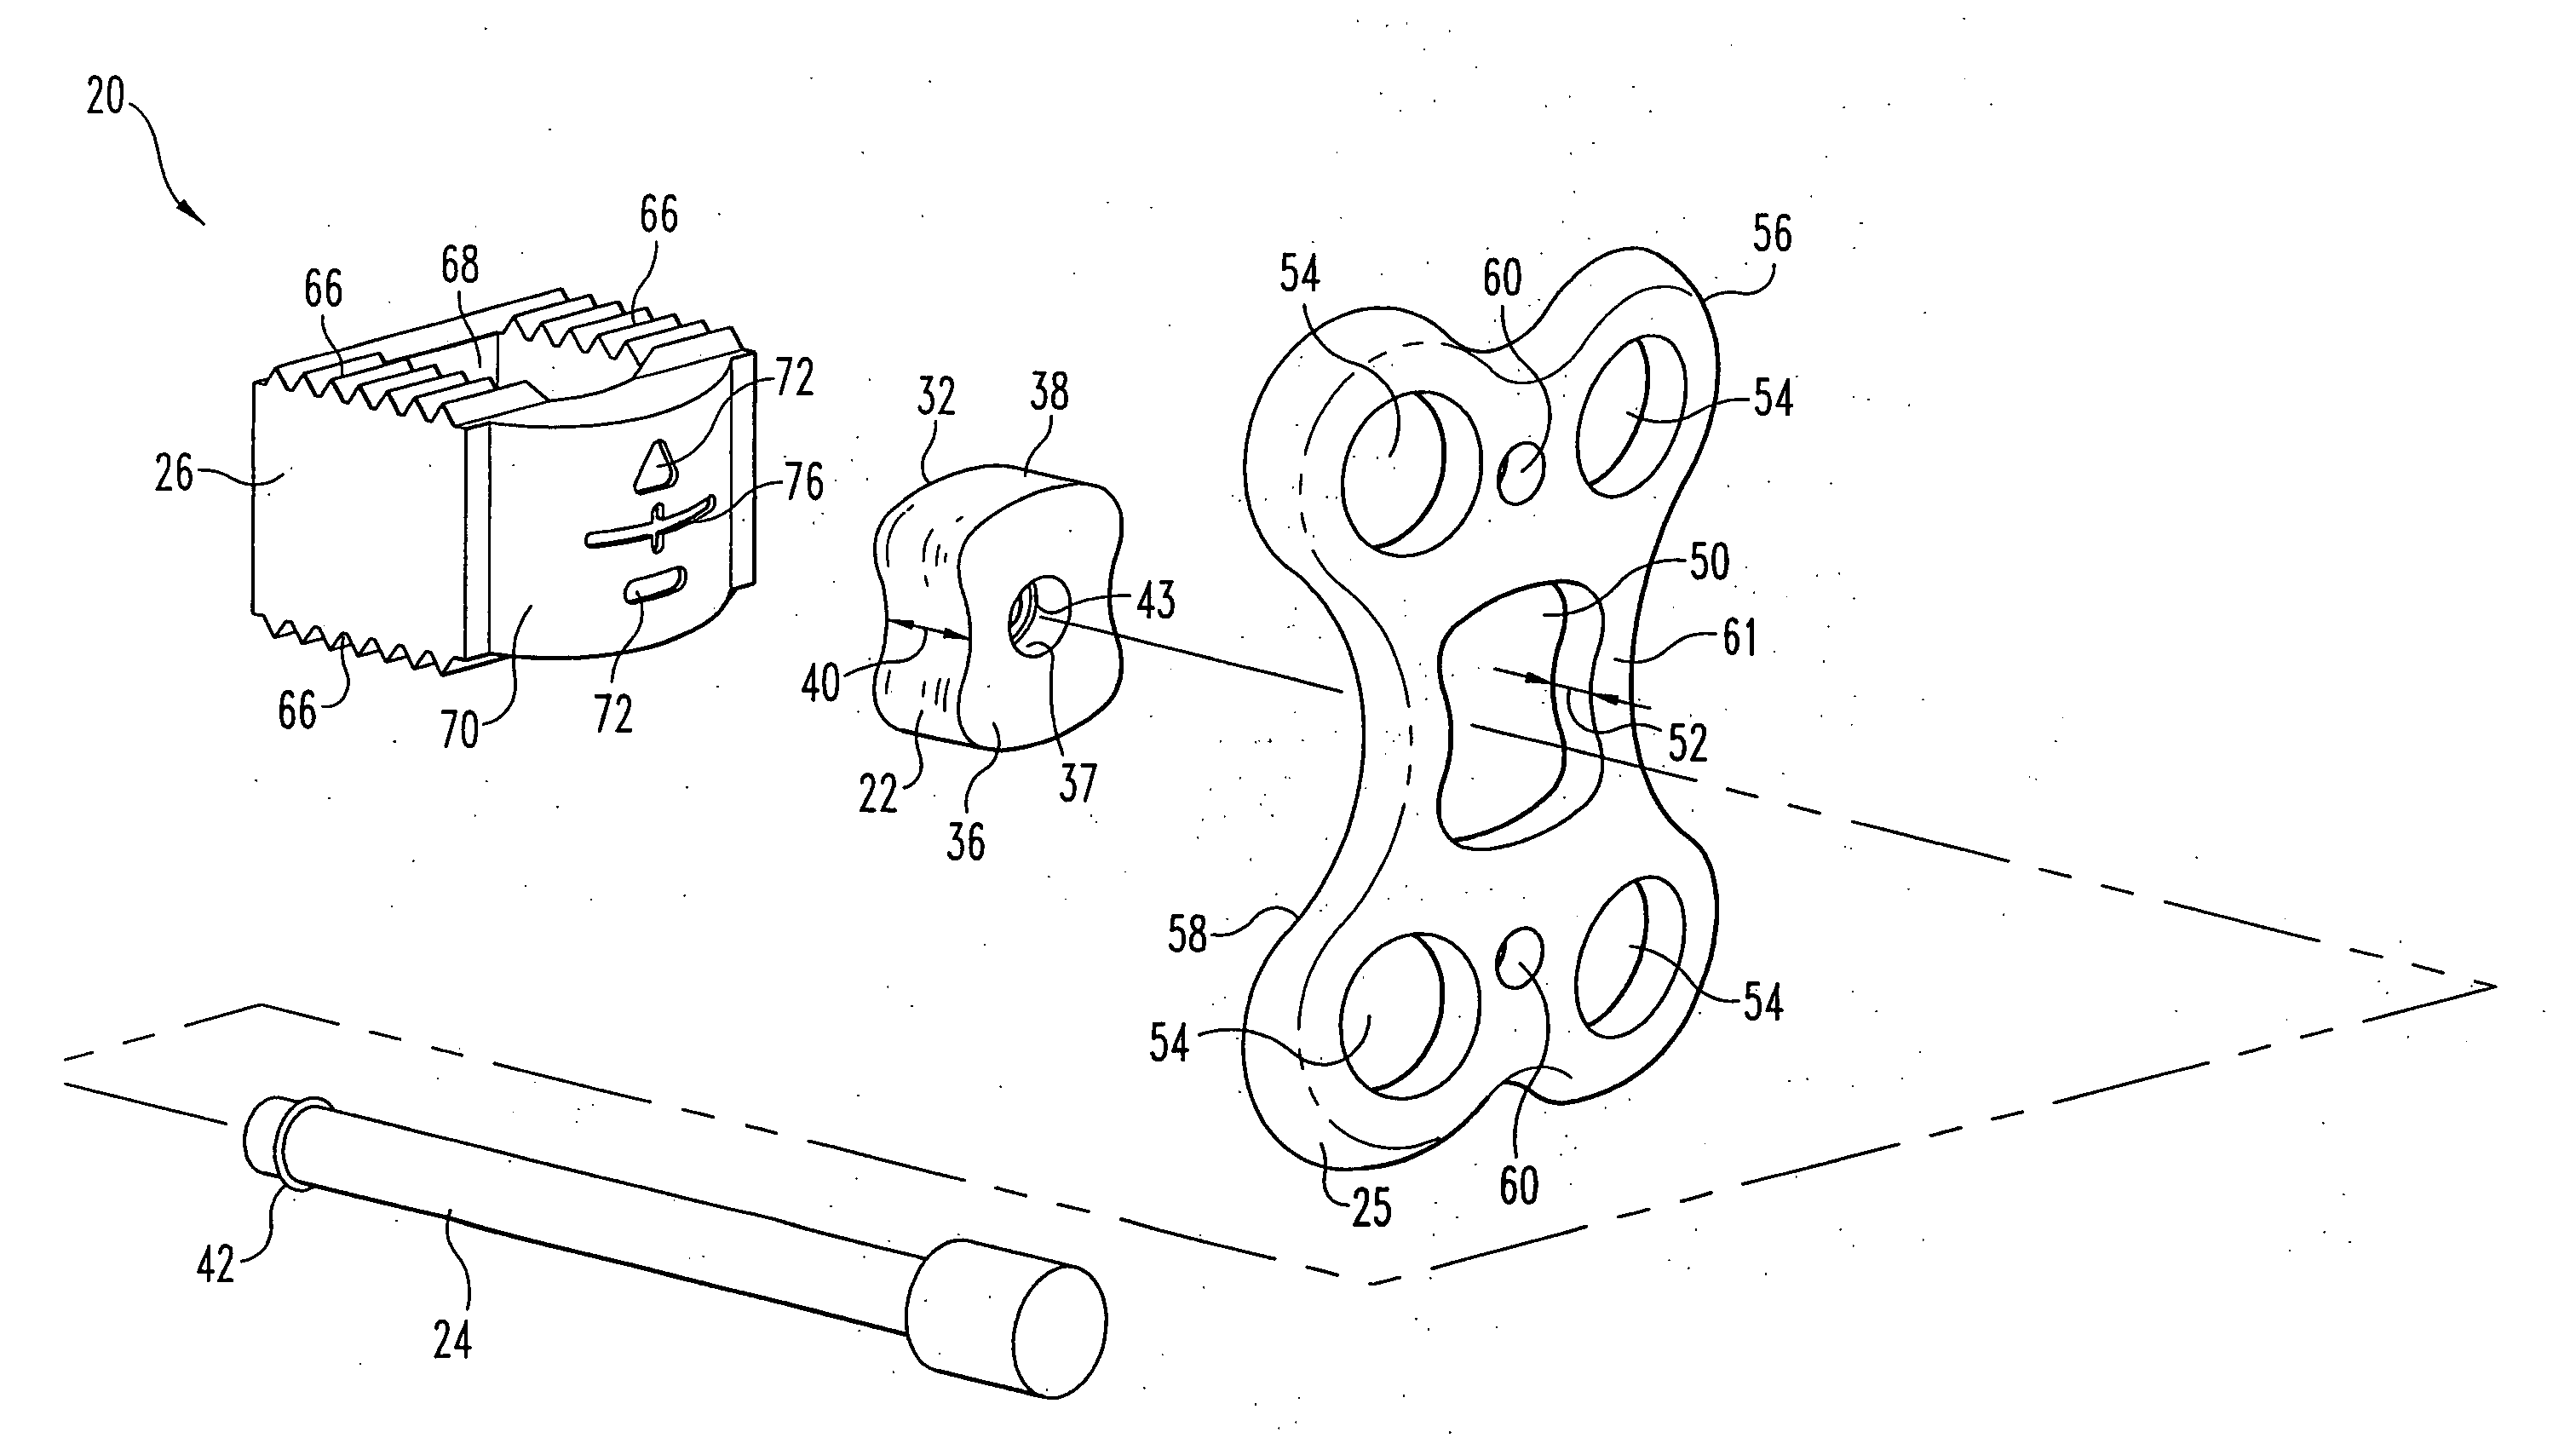 Orthopedic support locating or centering feature and method